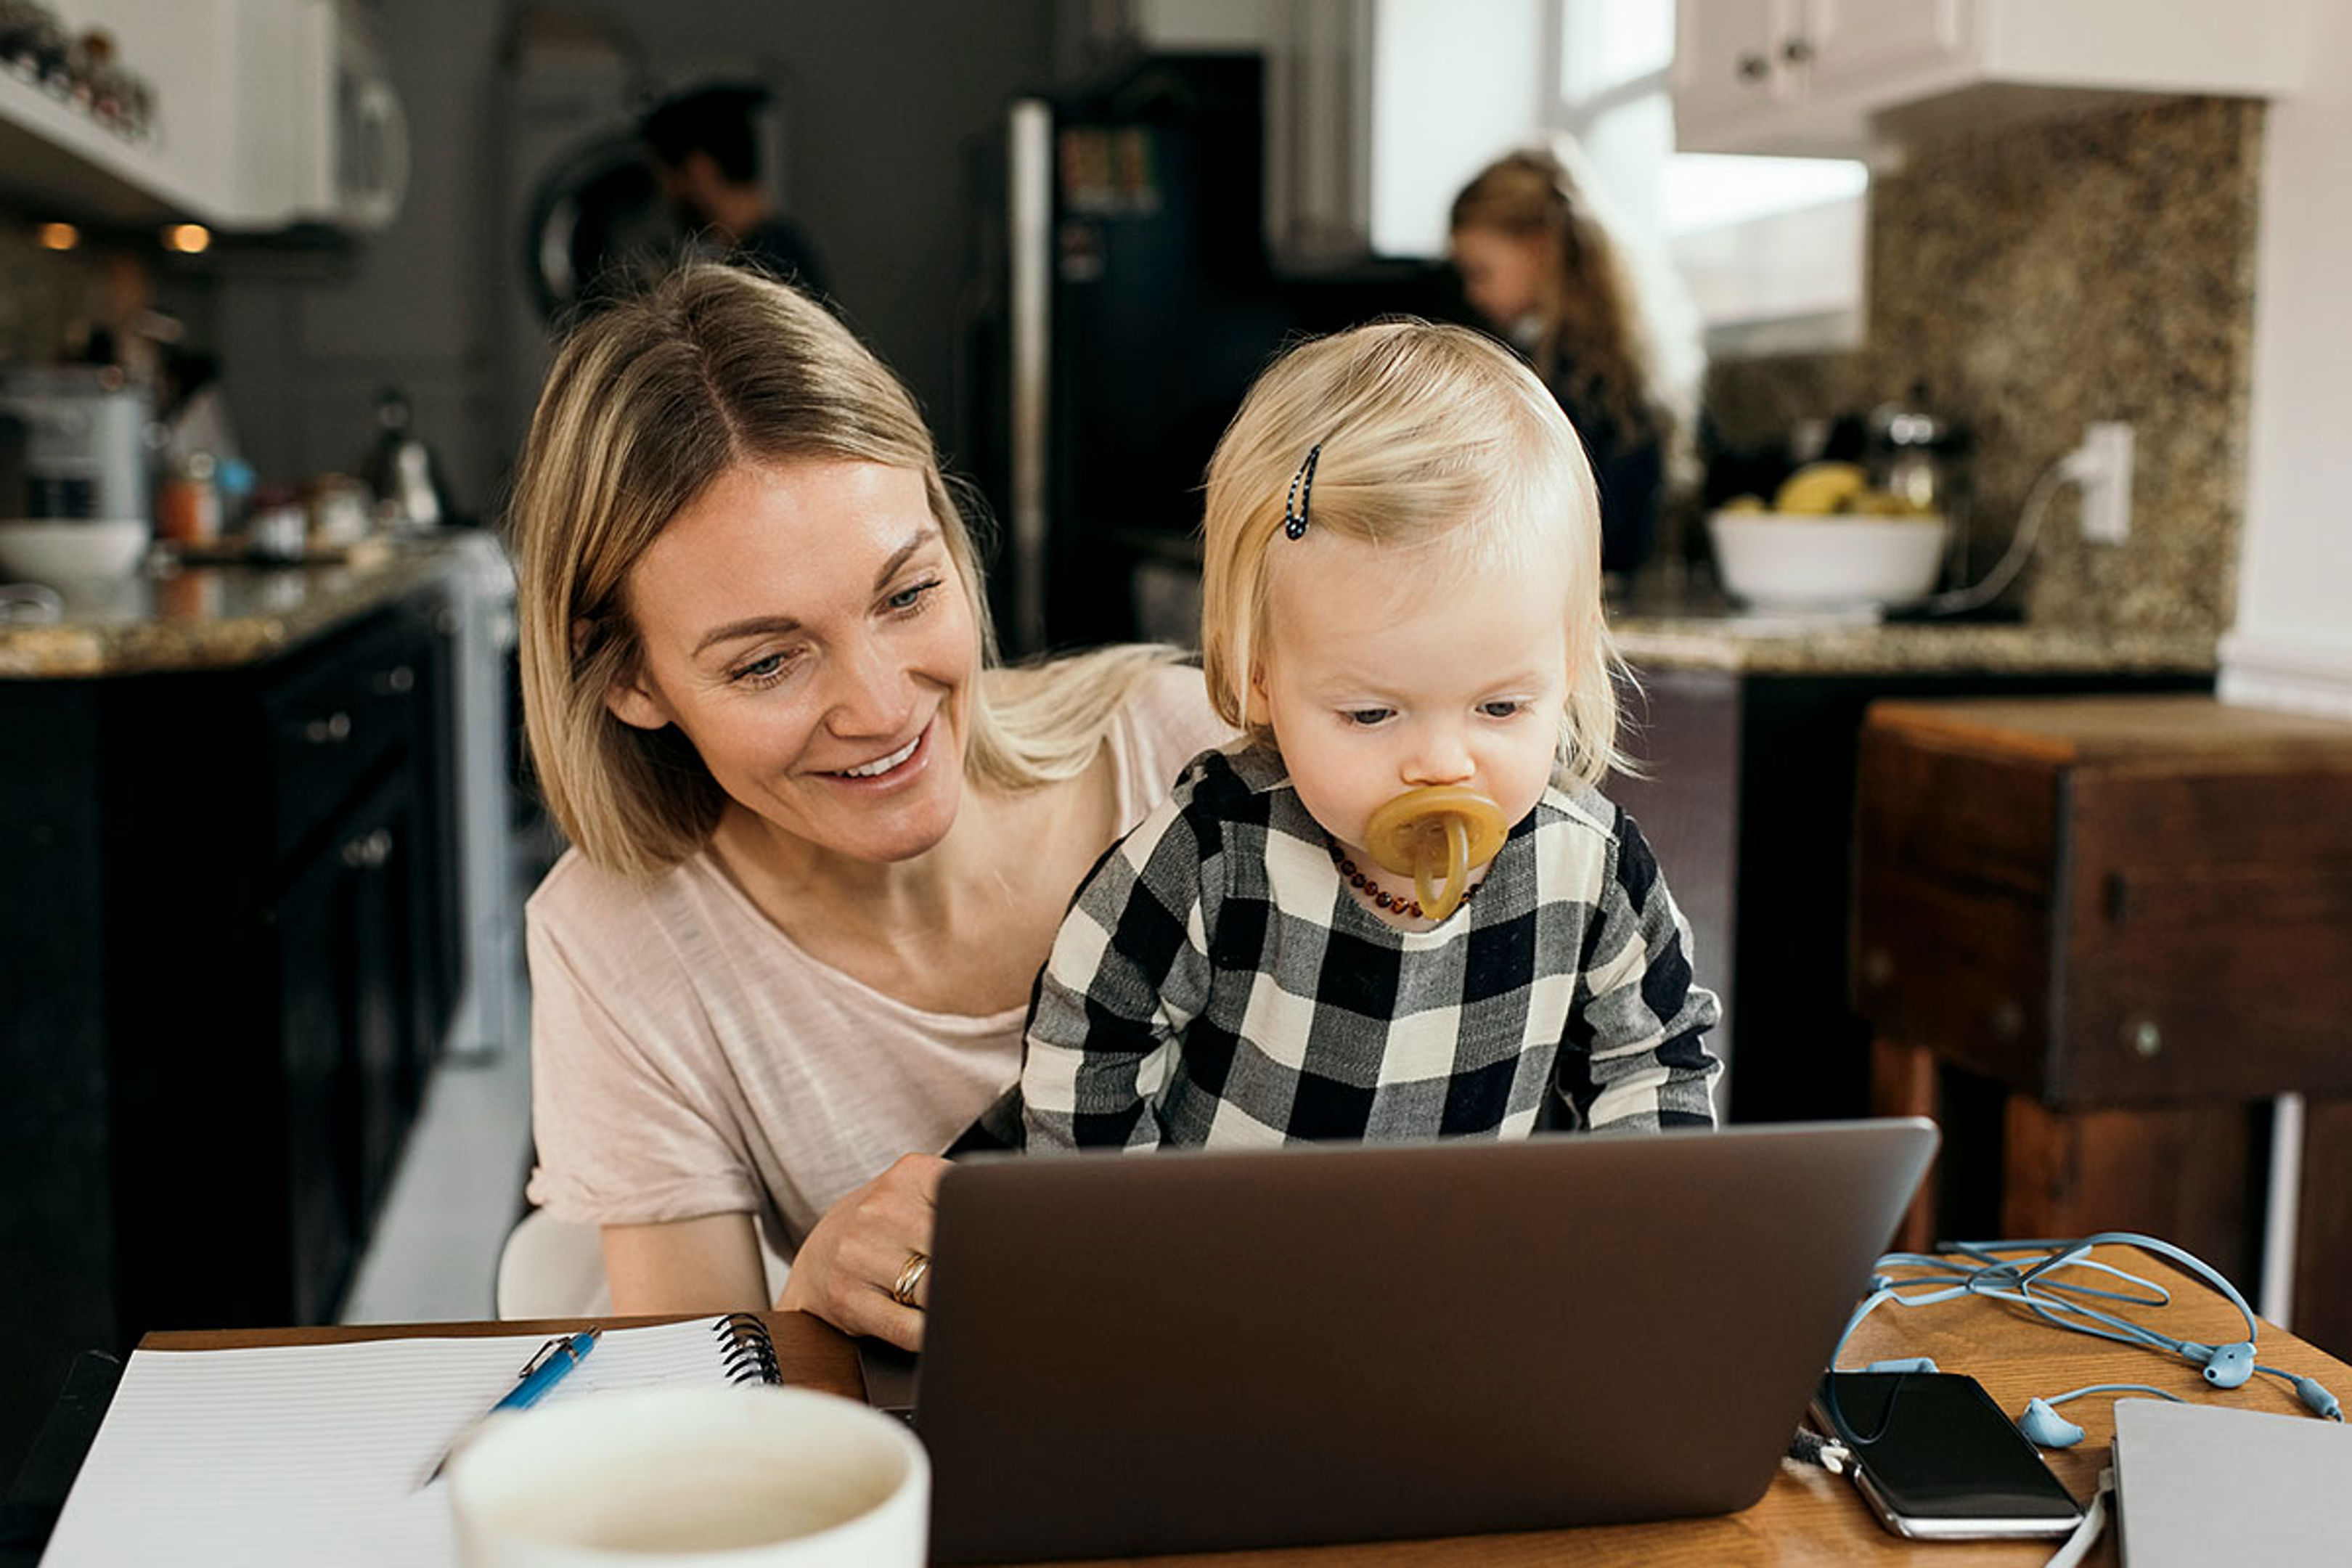 Woman And Child Looking At Laptop Together